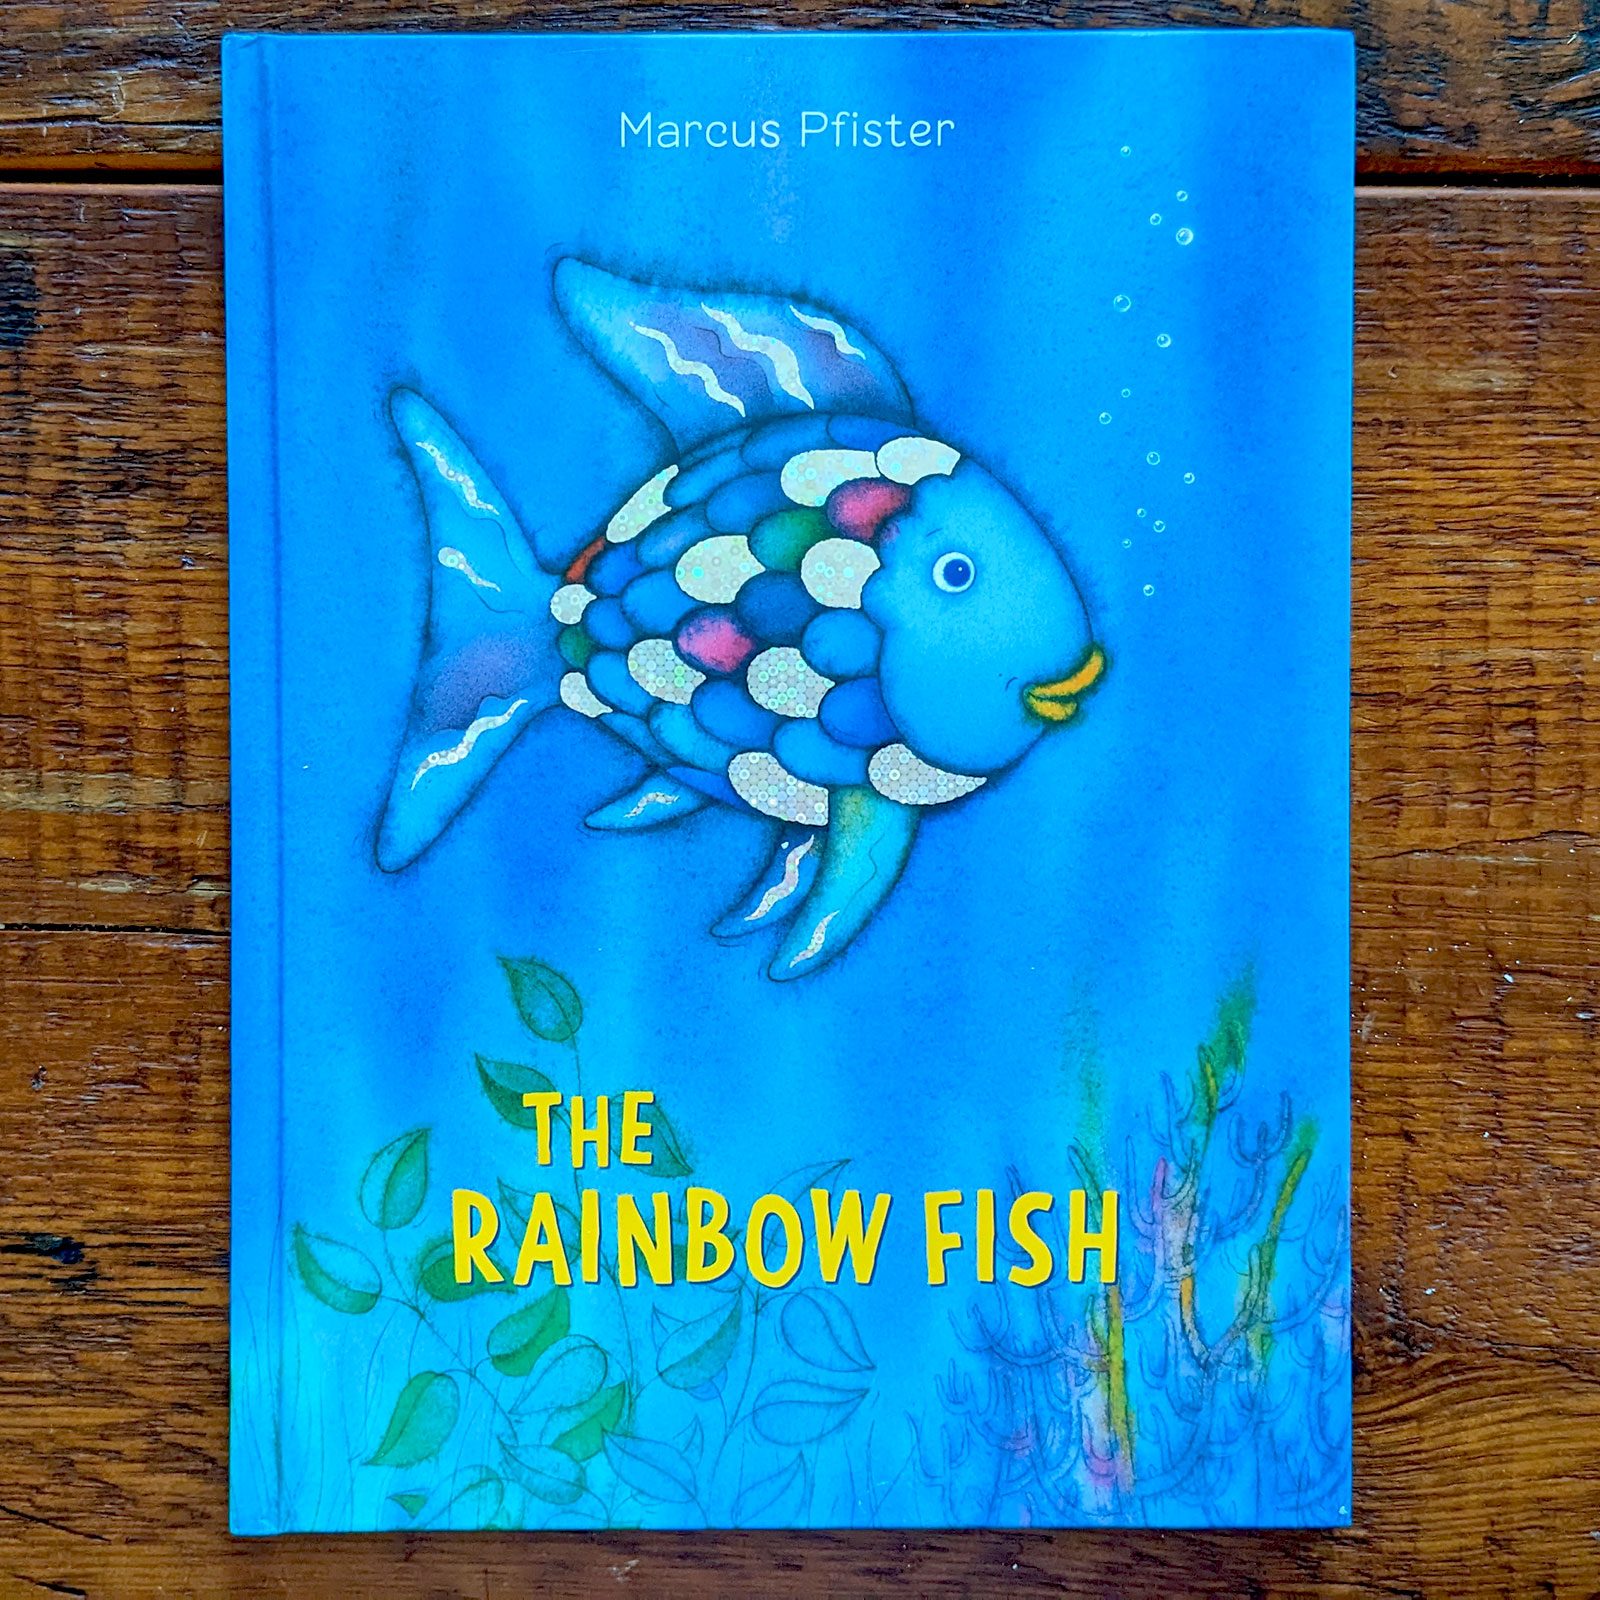 This Teacher Says the Book “Rainbow Fish” Might Be Outdated